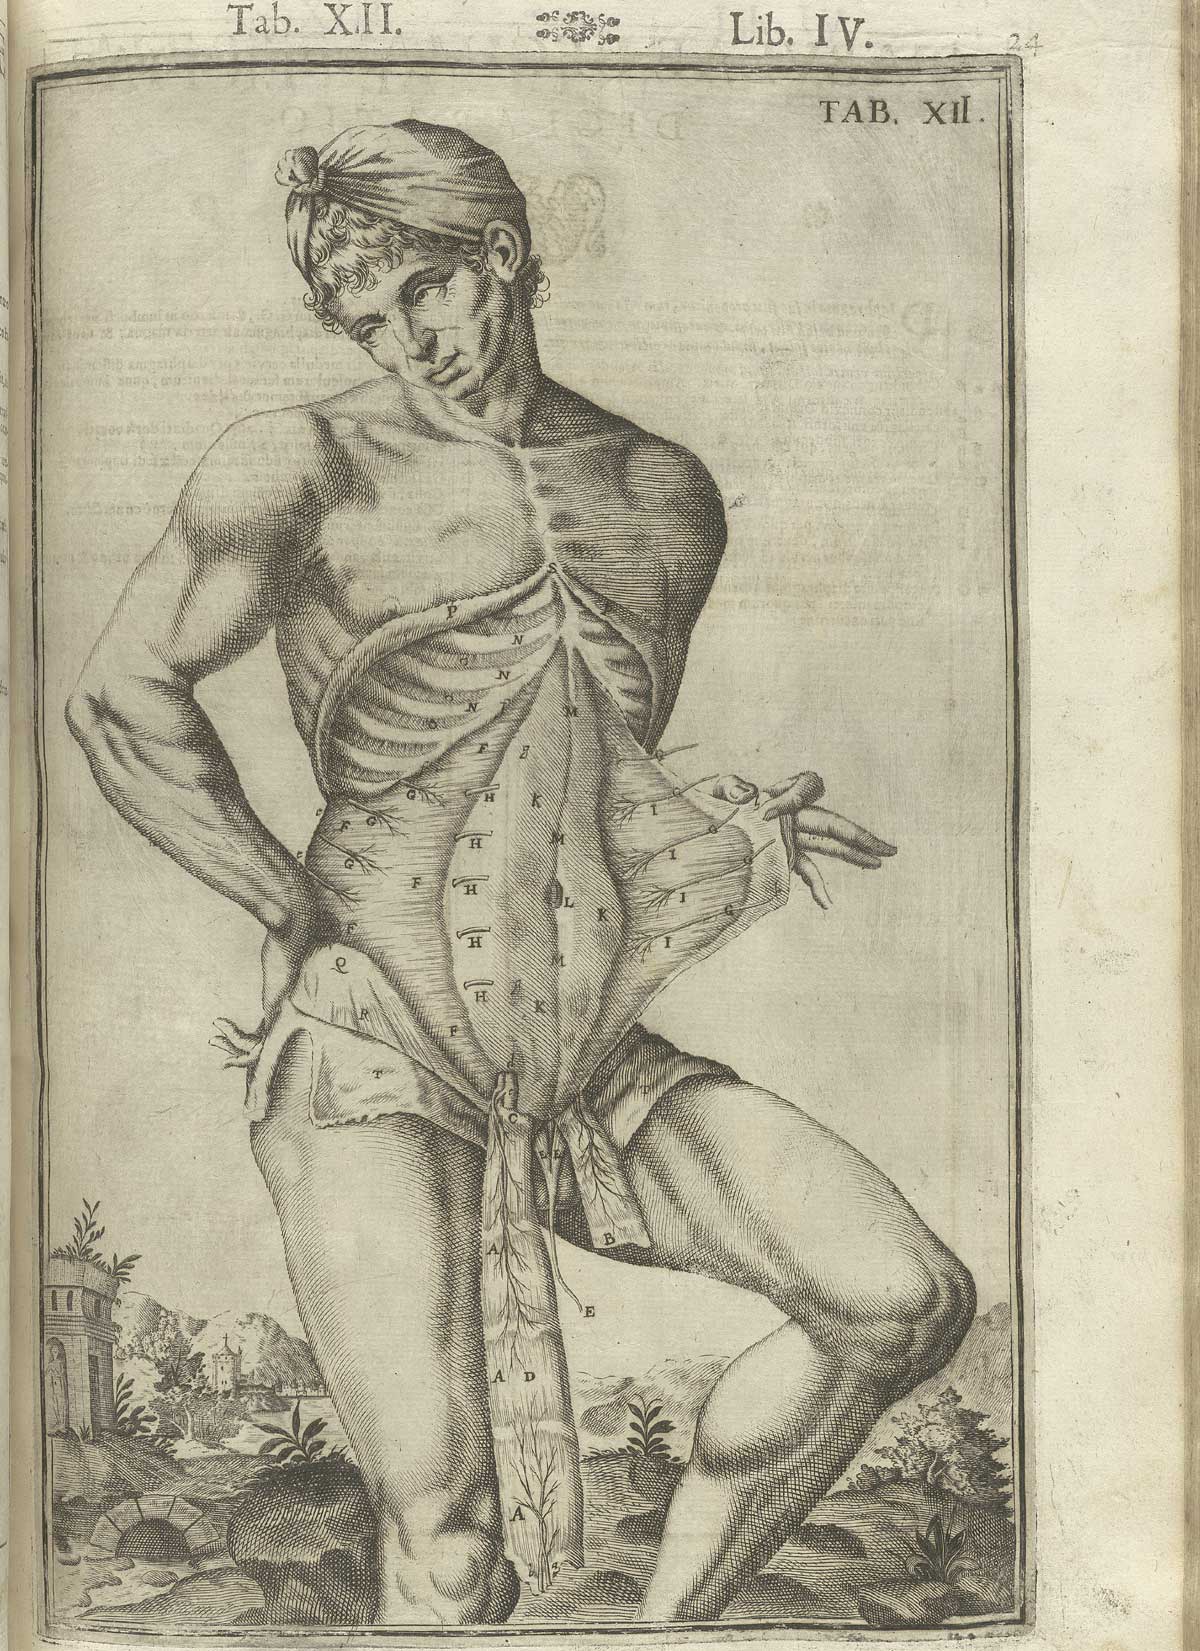 Engraving showing a nude male anatomical figure with head covered in a kerchief in a pastoral setting facing forward and to the left with flayed abdomen revealing musculature beneath; from Adriaan van de Spiegel and Giulio Cassieri’s De humani corporis fabrica libri decem, Venice, 1627, NLM call no. WZ 250 S755dh 1627.